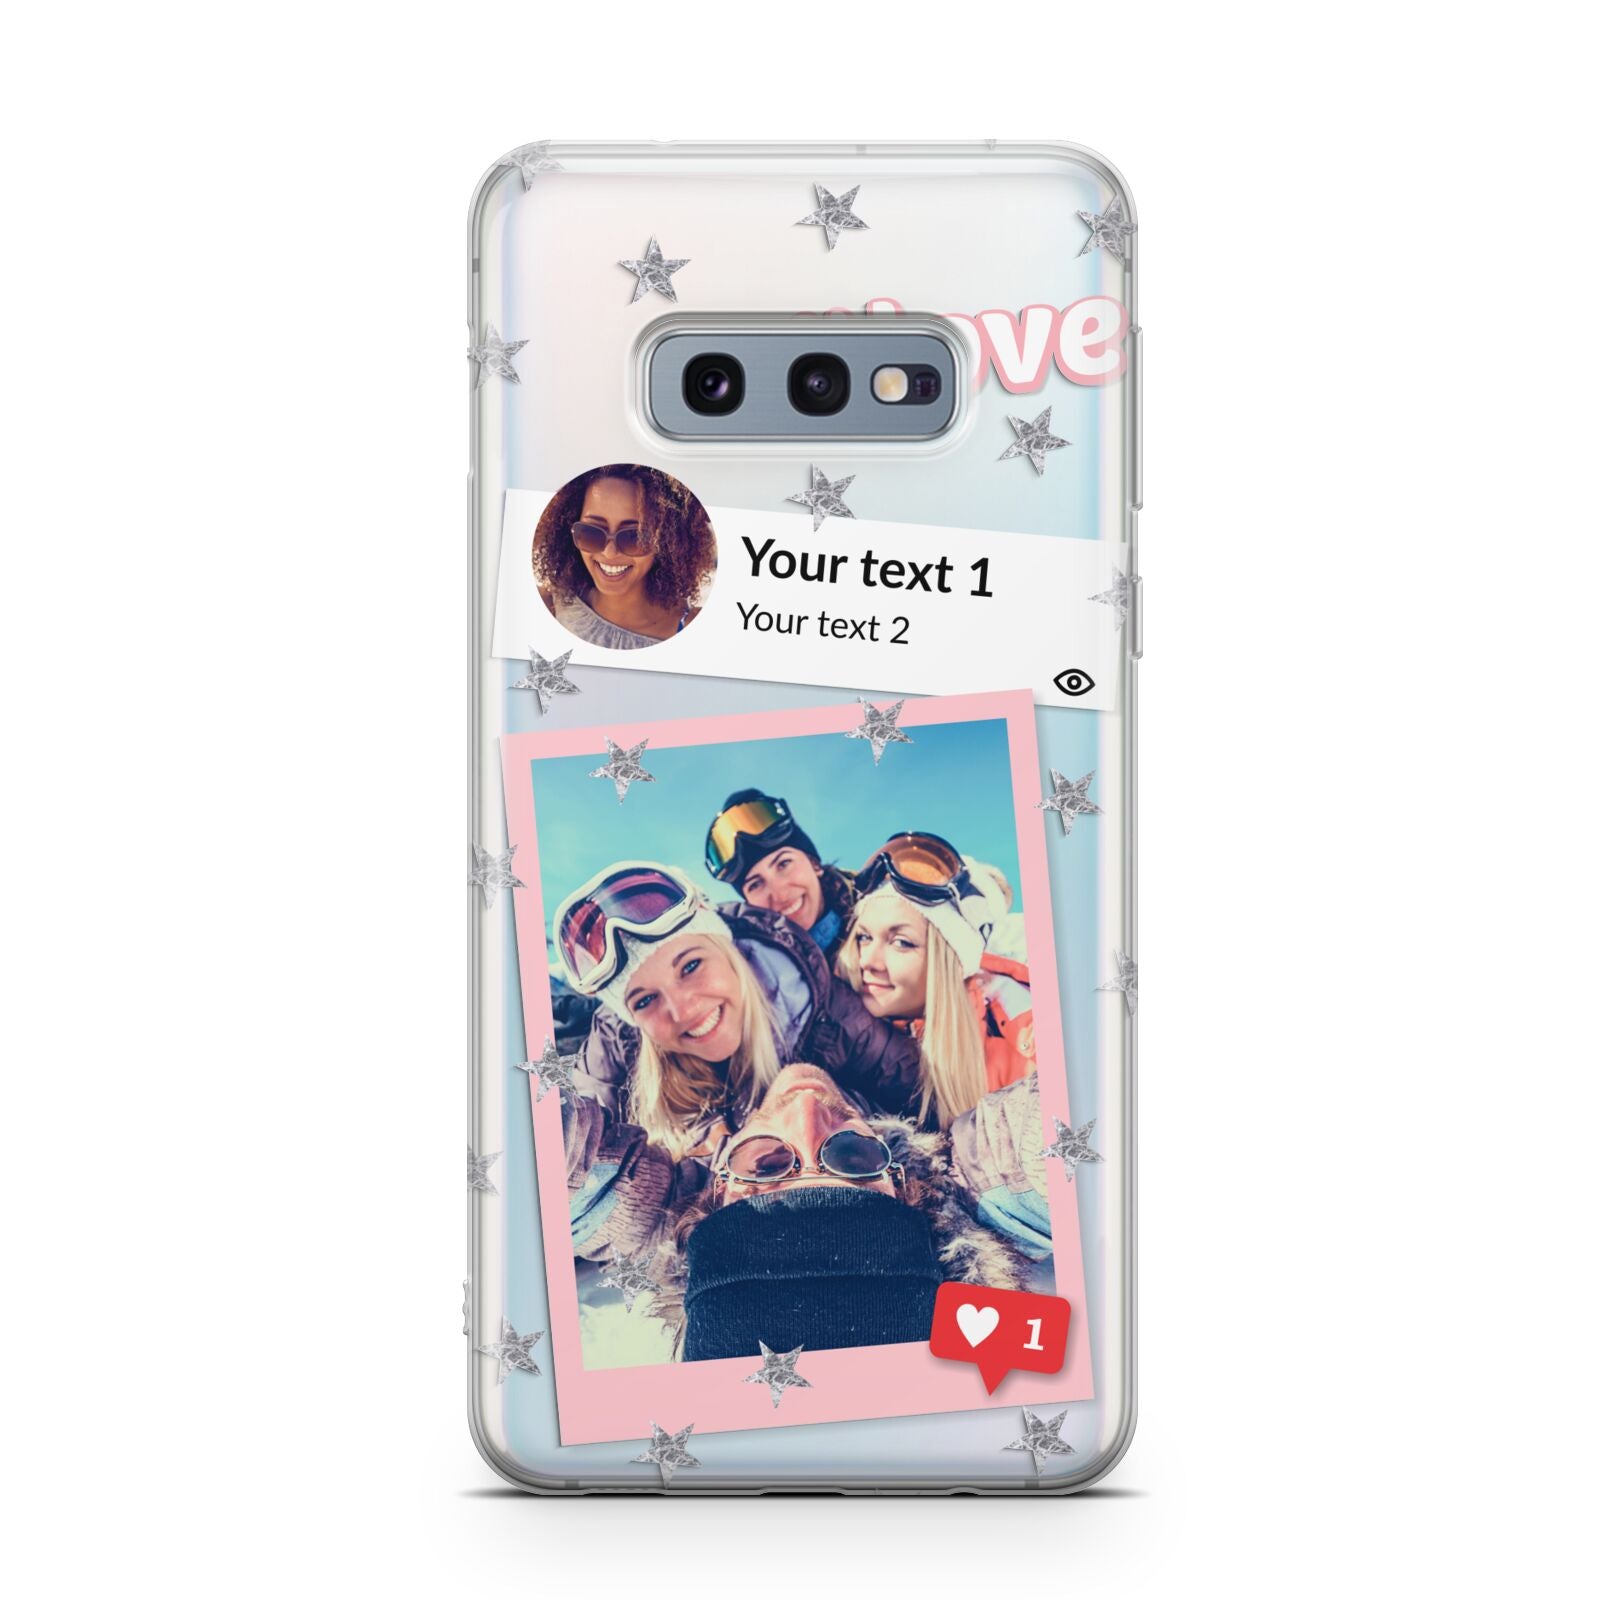 Starry Social Media Photo Montage Upload with Text Samsung Galaxy S10E Case